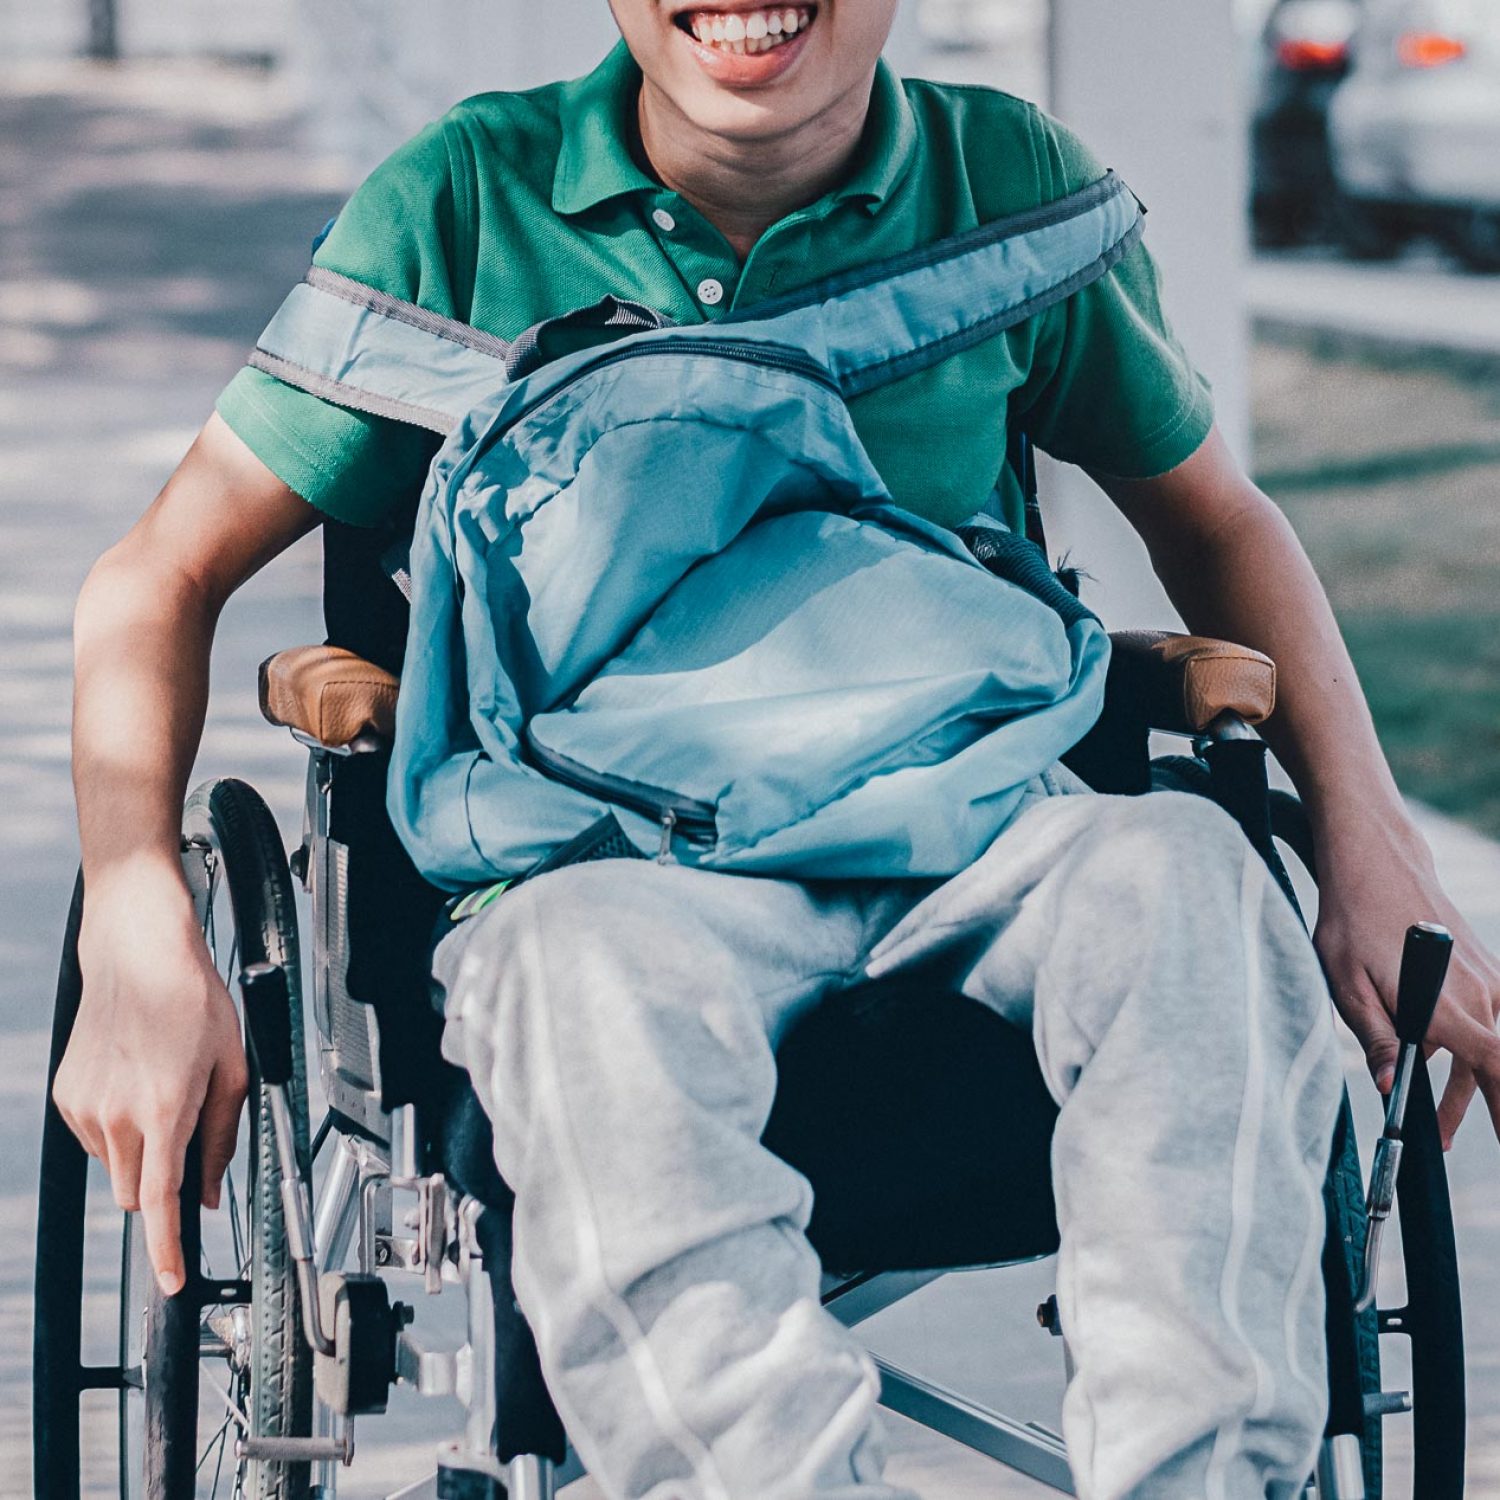 Confident Asian disabled teen boy on wheelchair determining to use wheelchair by himself, Lifestyle in the education age of special need kid, Muscle and self-esteem development concept.